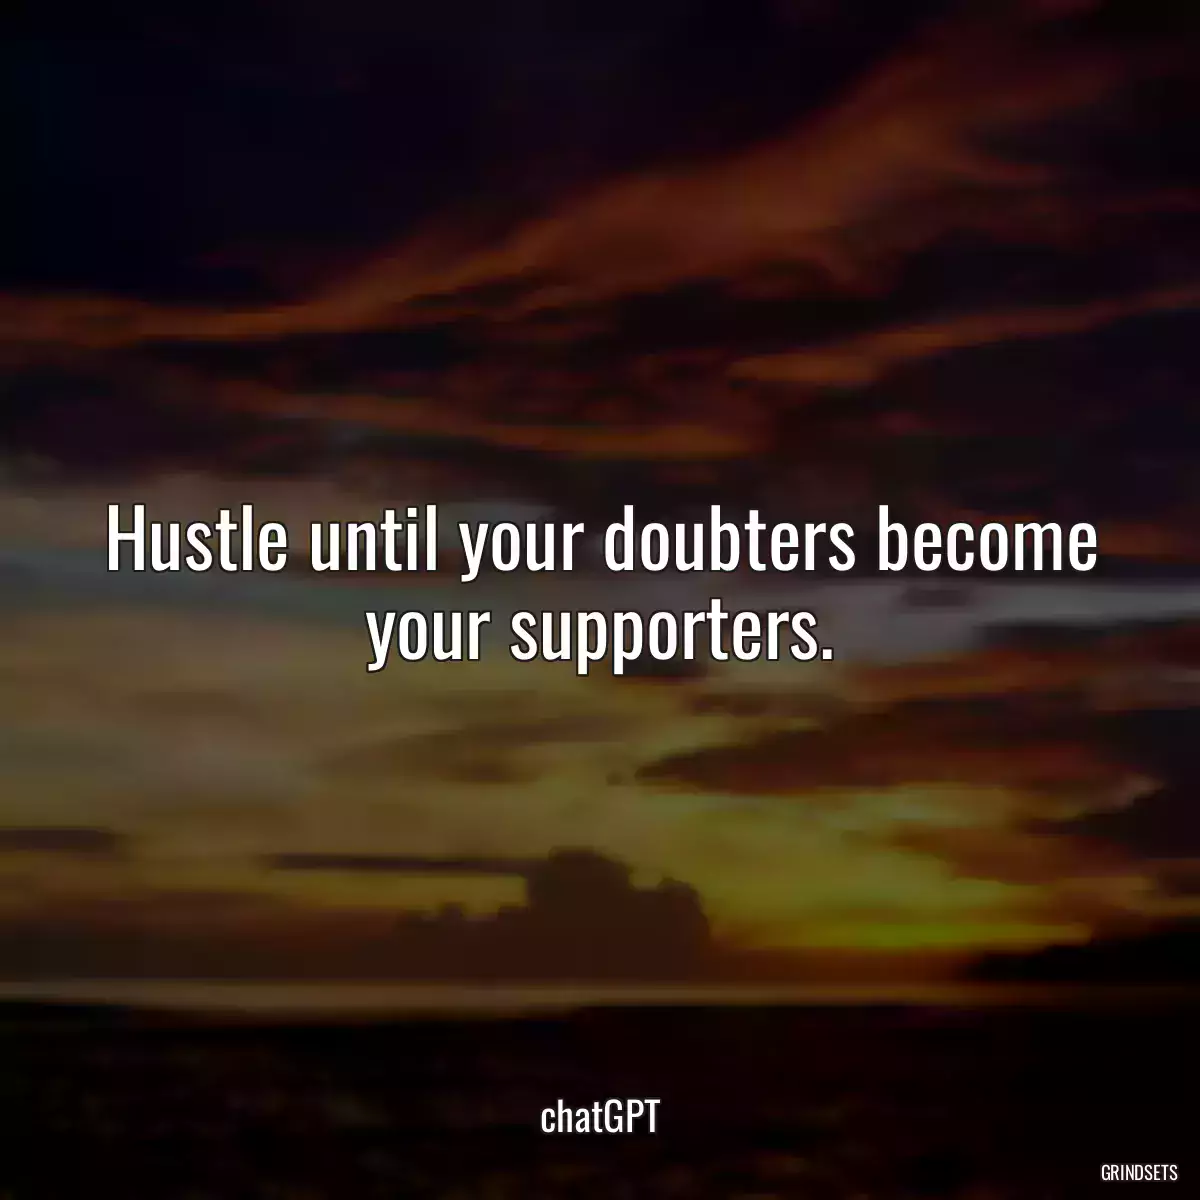 Hustle until your doubters become your supporters.